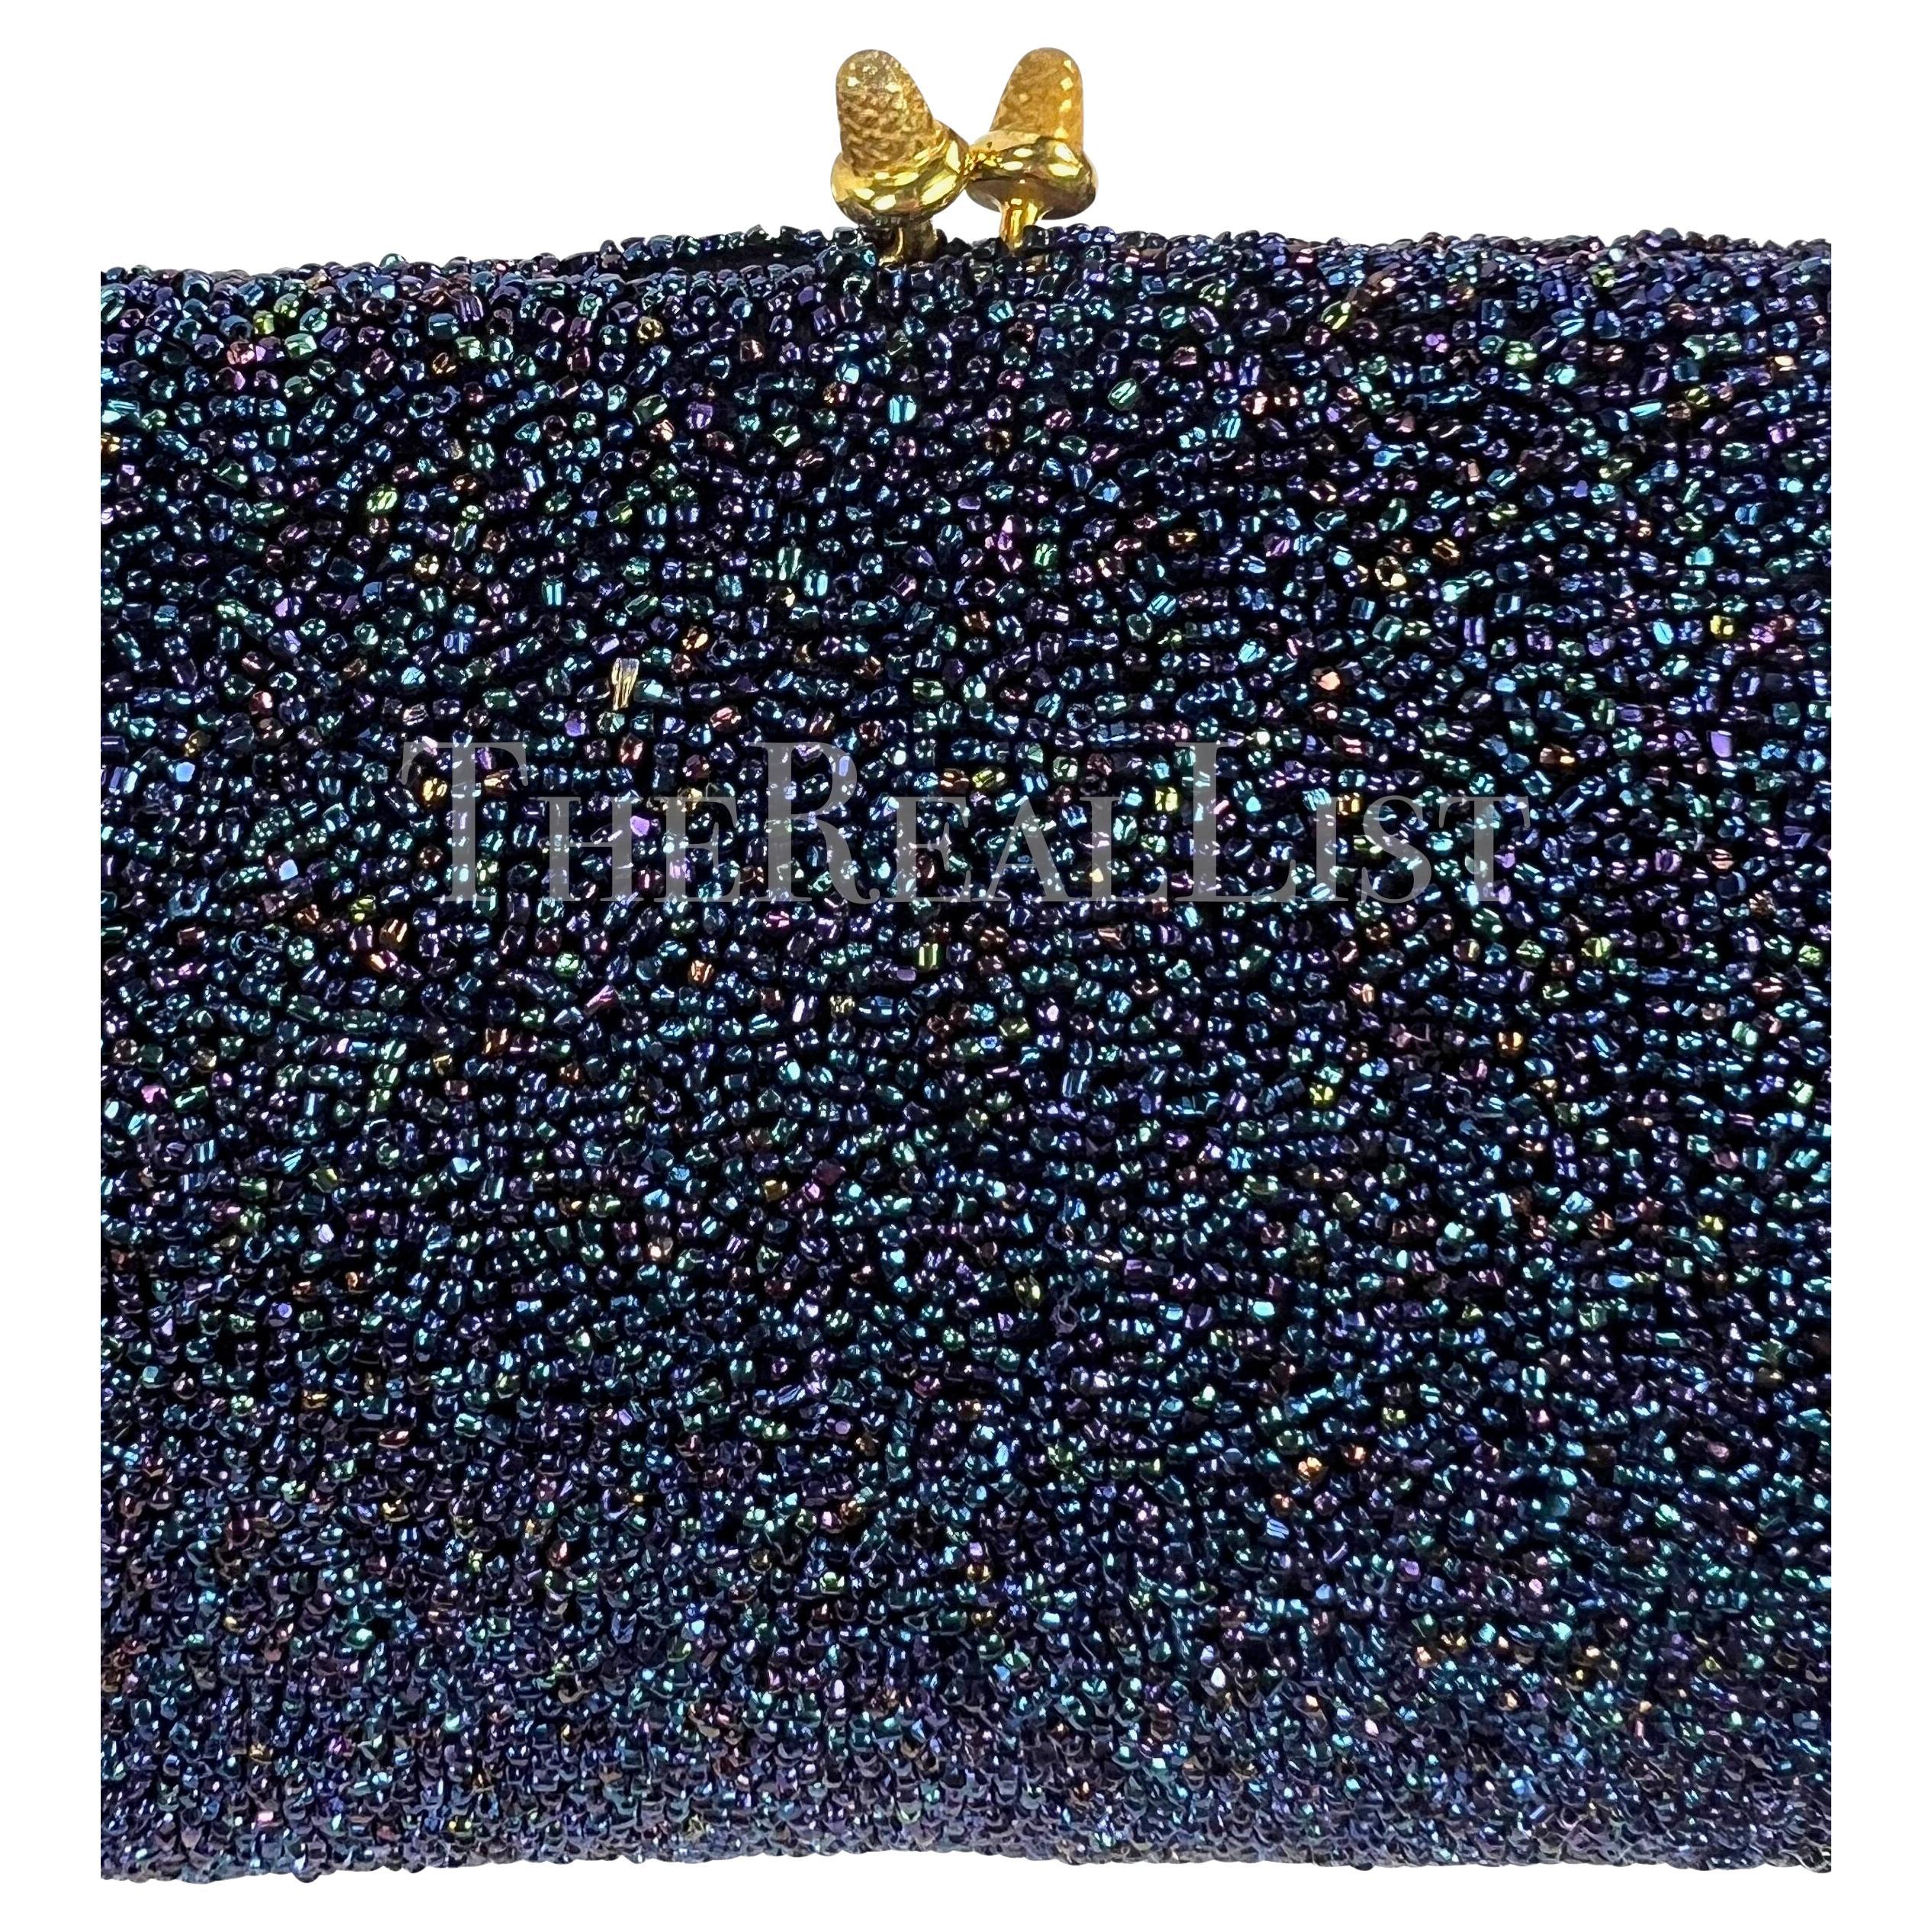 Presenting an incredible iridescent blue Gucci beaded clutch. Step back in time to the glamorous era of the 1970s with this stunning bag adorned in shimmering blue iridescent caviar beads. Its captivating design is tastefully complemented by the